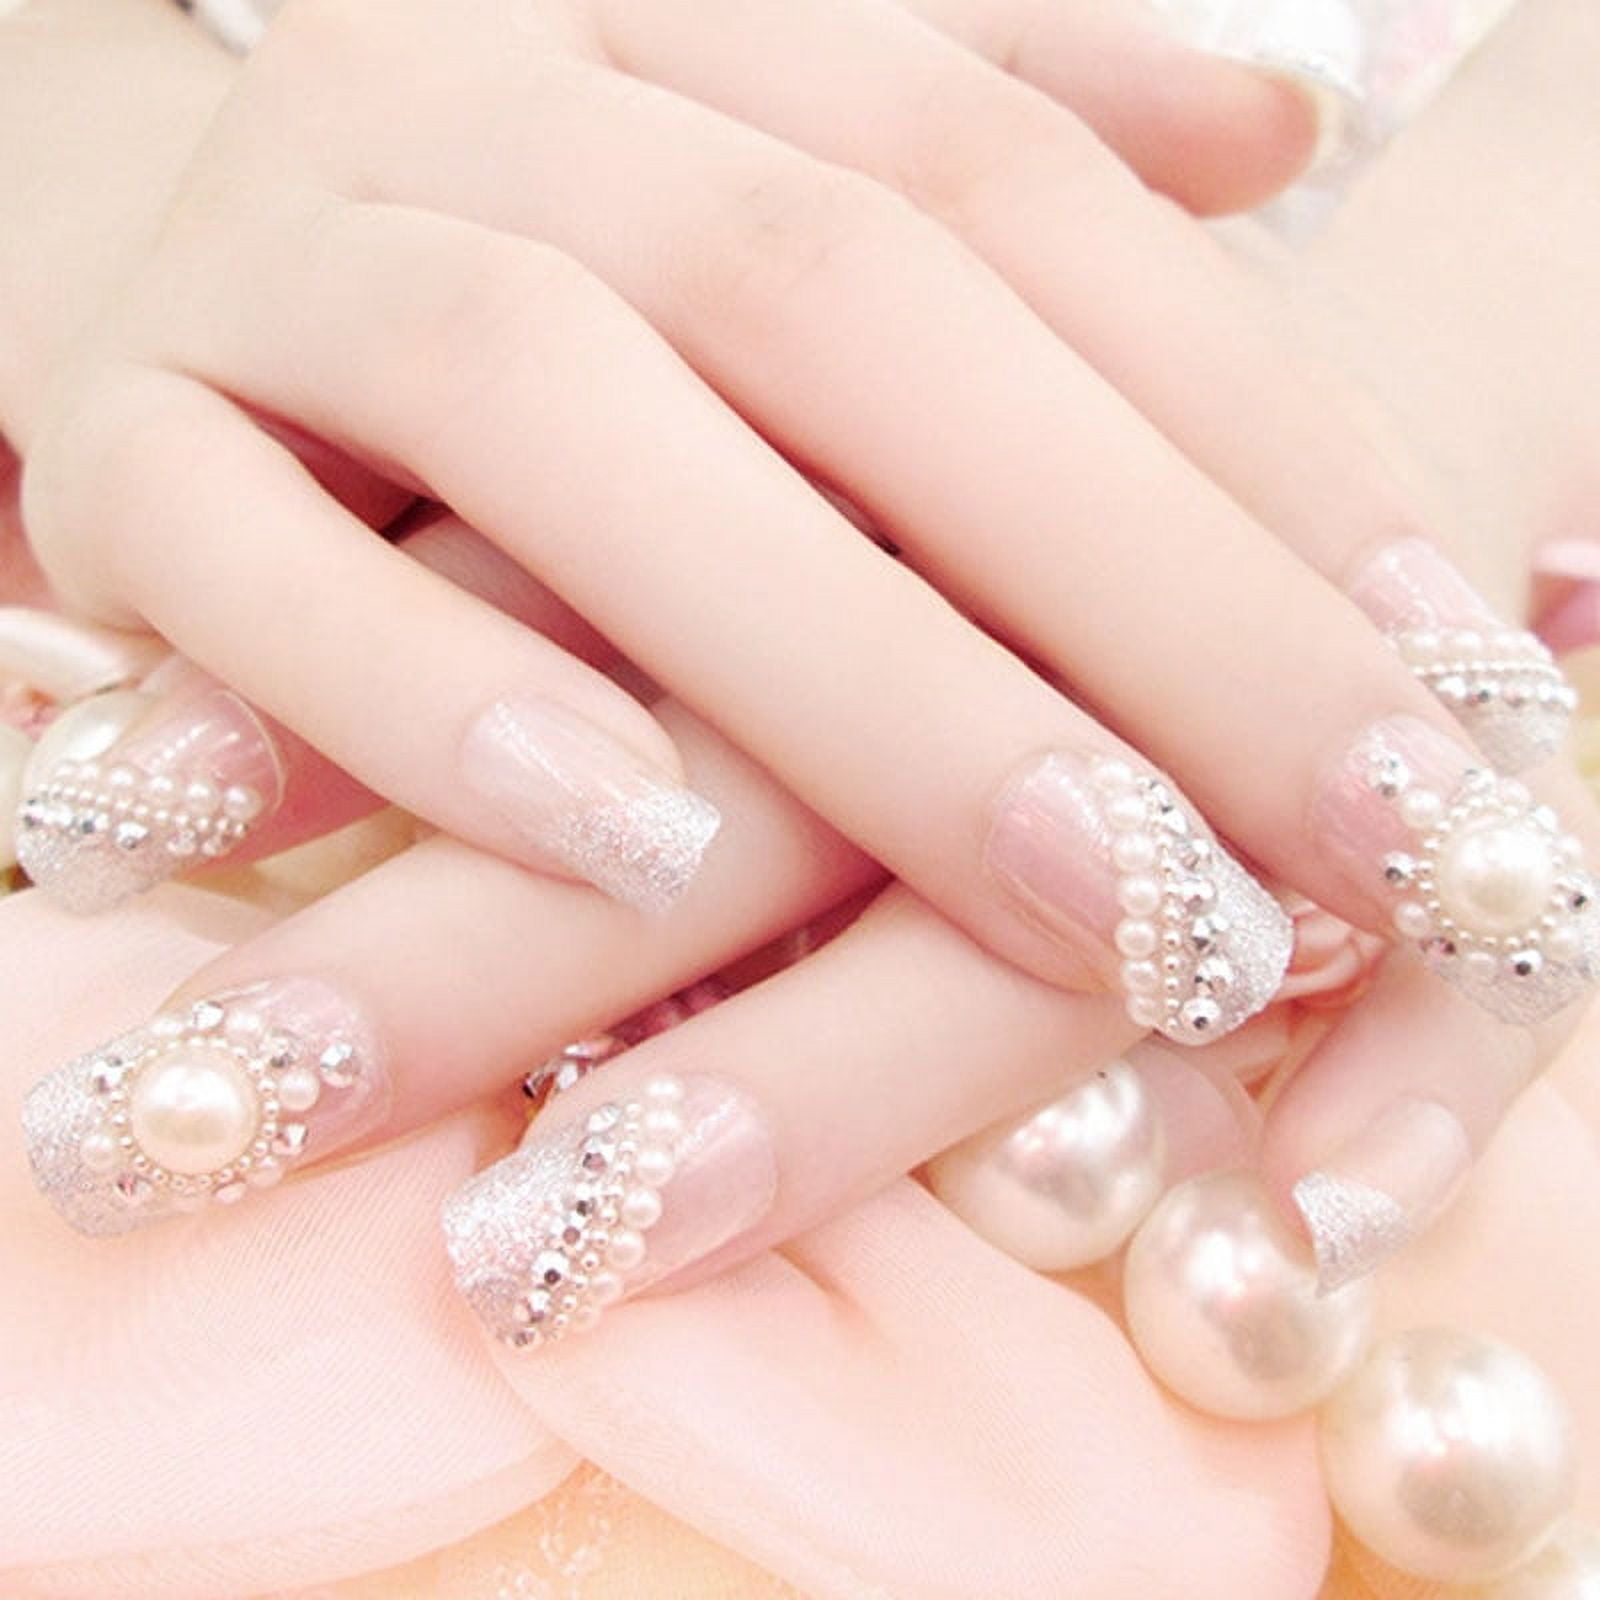 70+ Wedding Nails For Brides : Barely There Nails with Pearl Accents